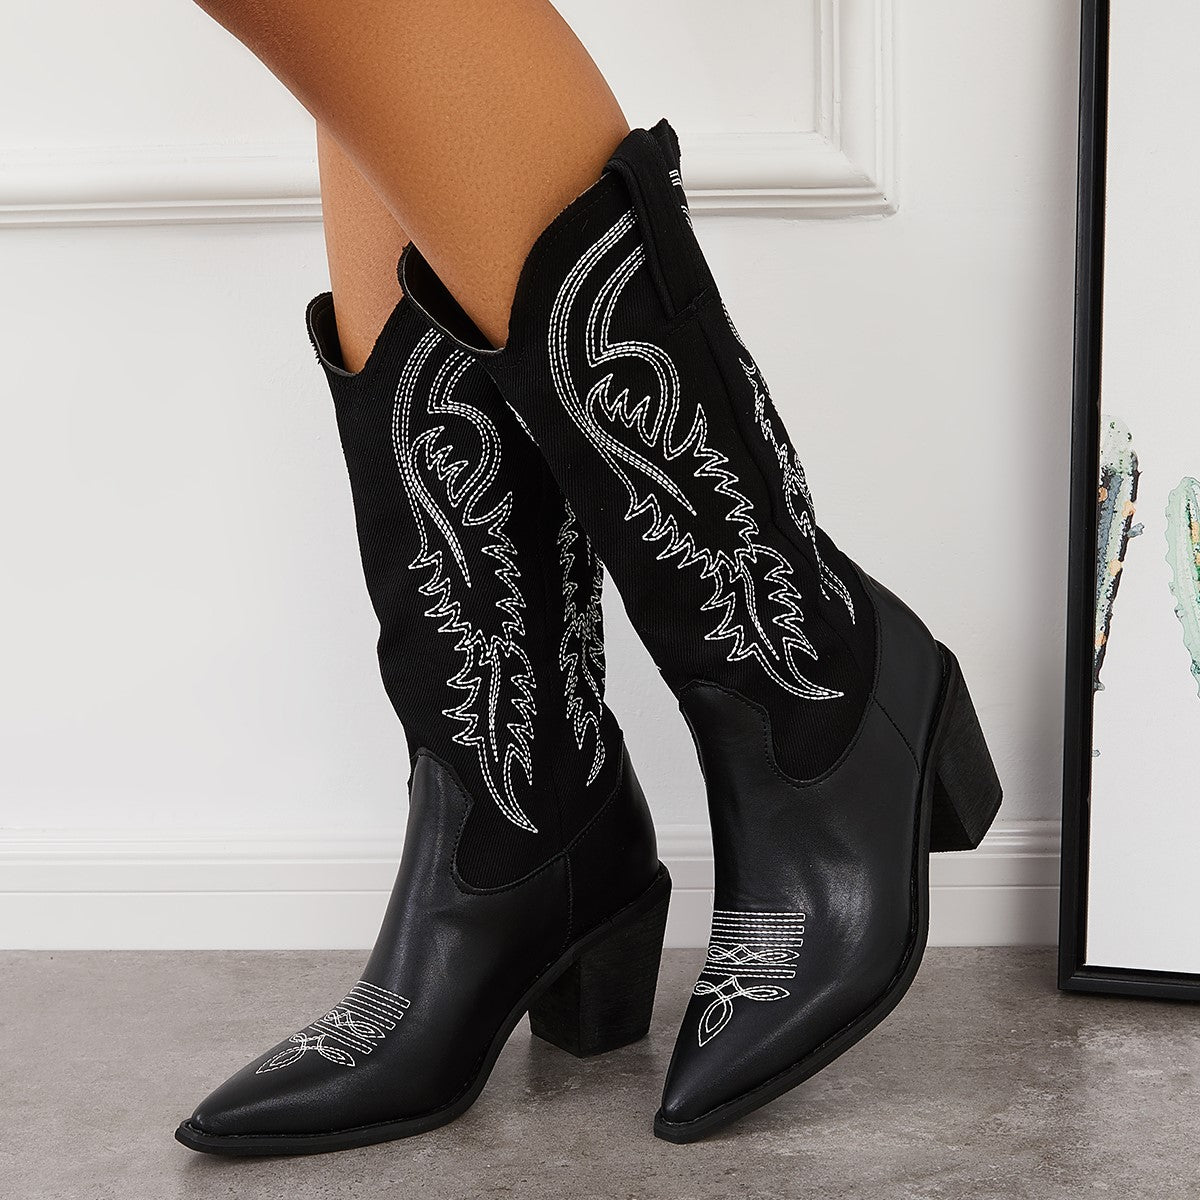 Western Embroidery Cowboy Boots Knee High Riding Boots – Tinstree